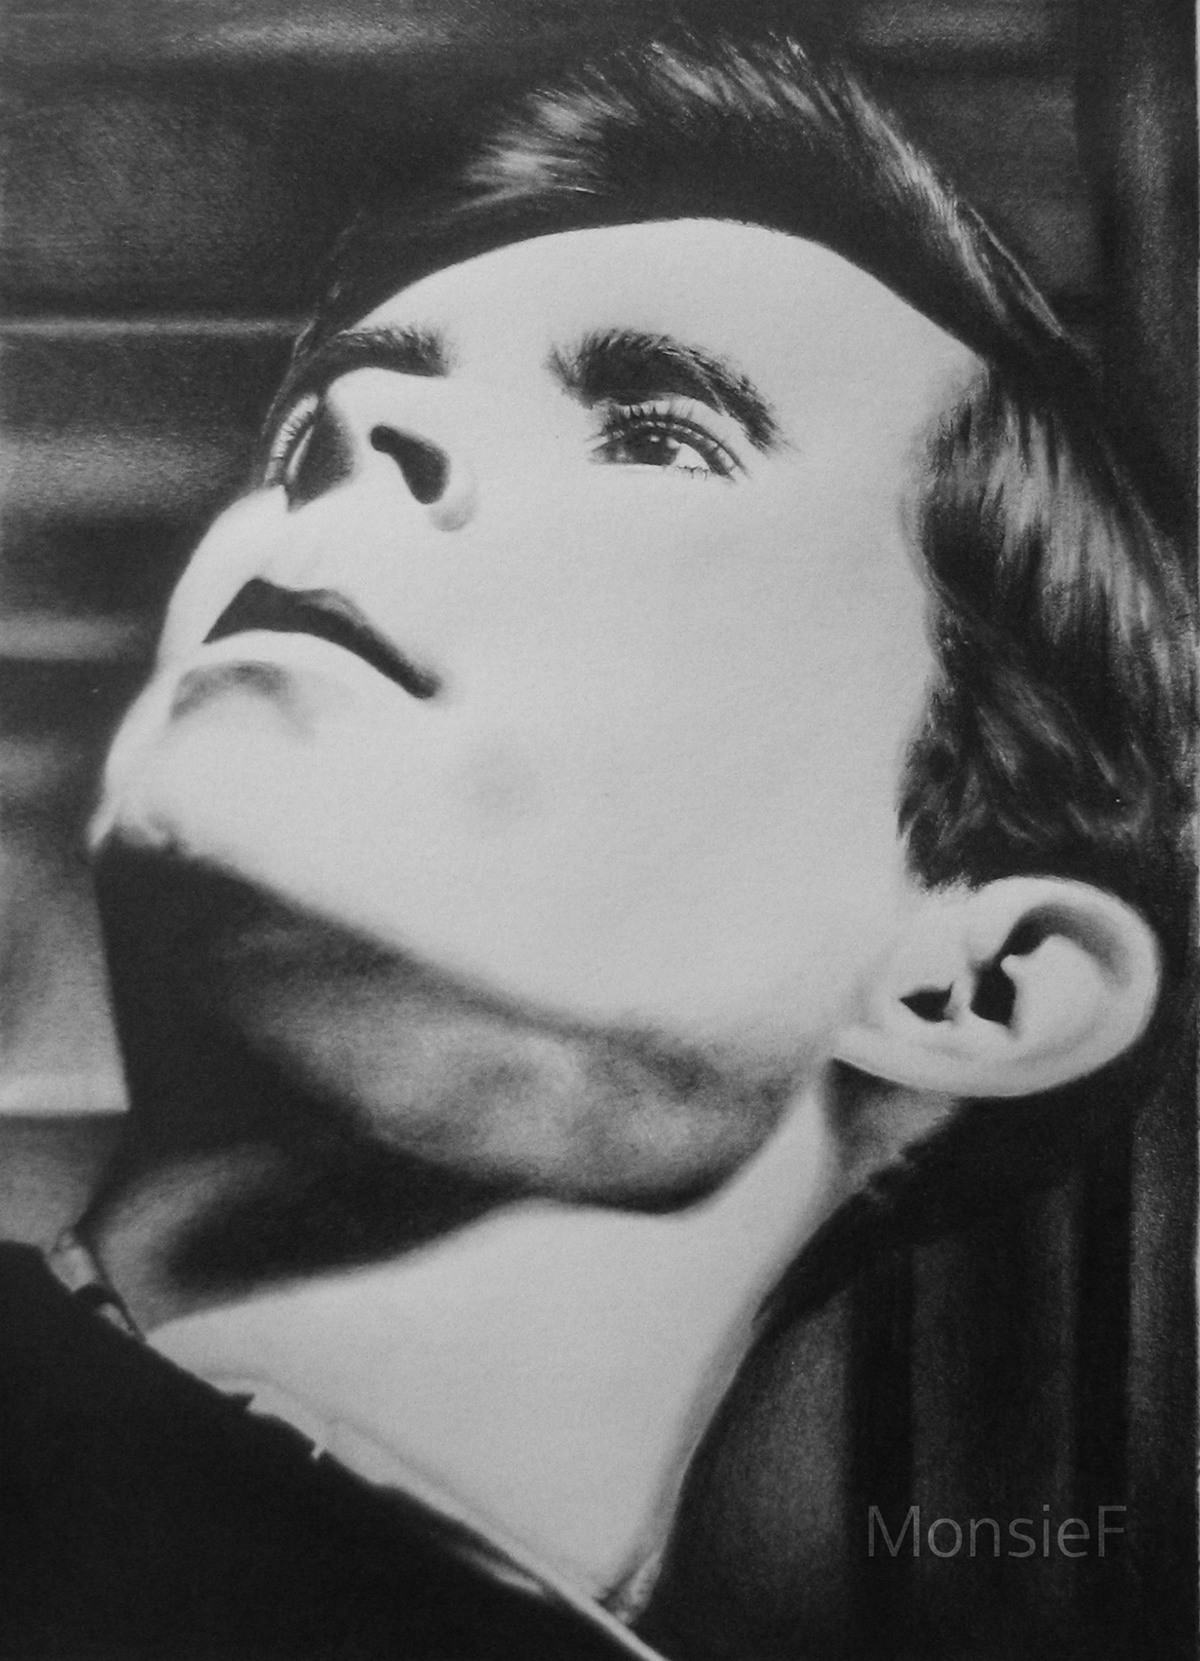 anthony perkins norman bates psycho Hitchcock thriller horror movie actors old movies portraits